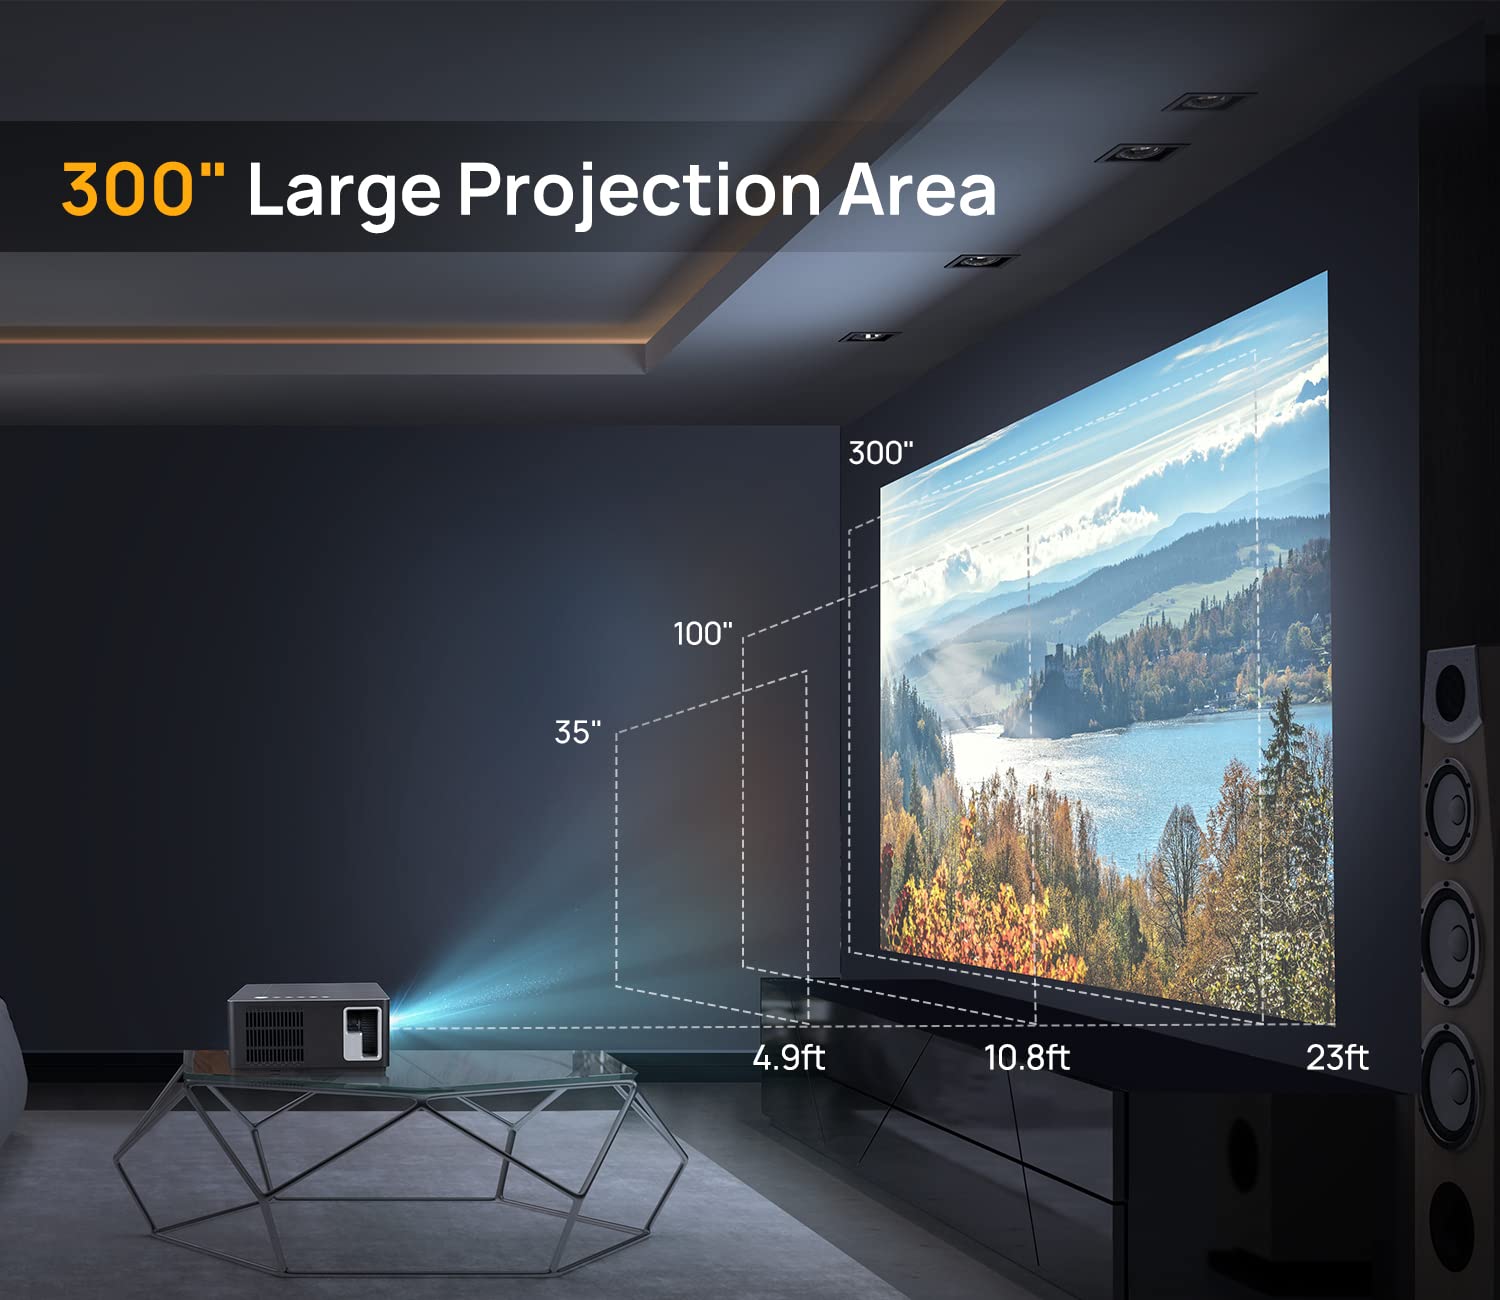 UUO 4K Projector,Native 1080P Projector for Outdoor Home,Movie Projector support 4K HD Video ±50° Digital Keystone & 300’’ Projection Area,Compatible with TV Stick,Laptop,PS5,X-Box,iOS Android